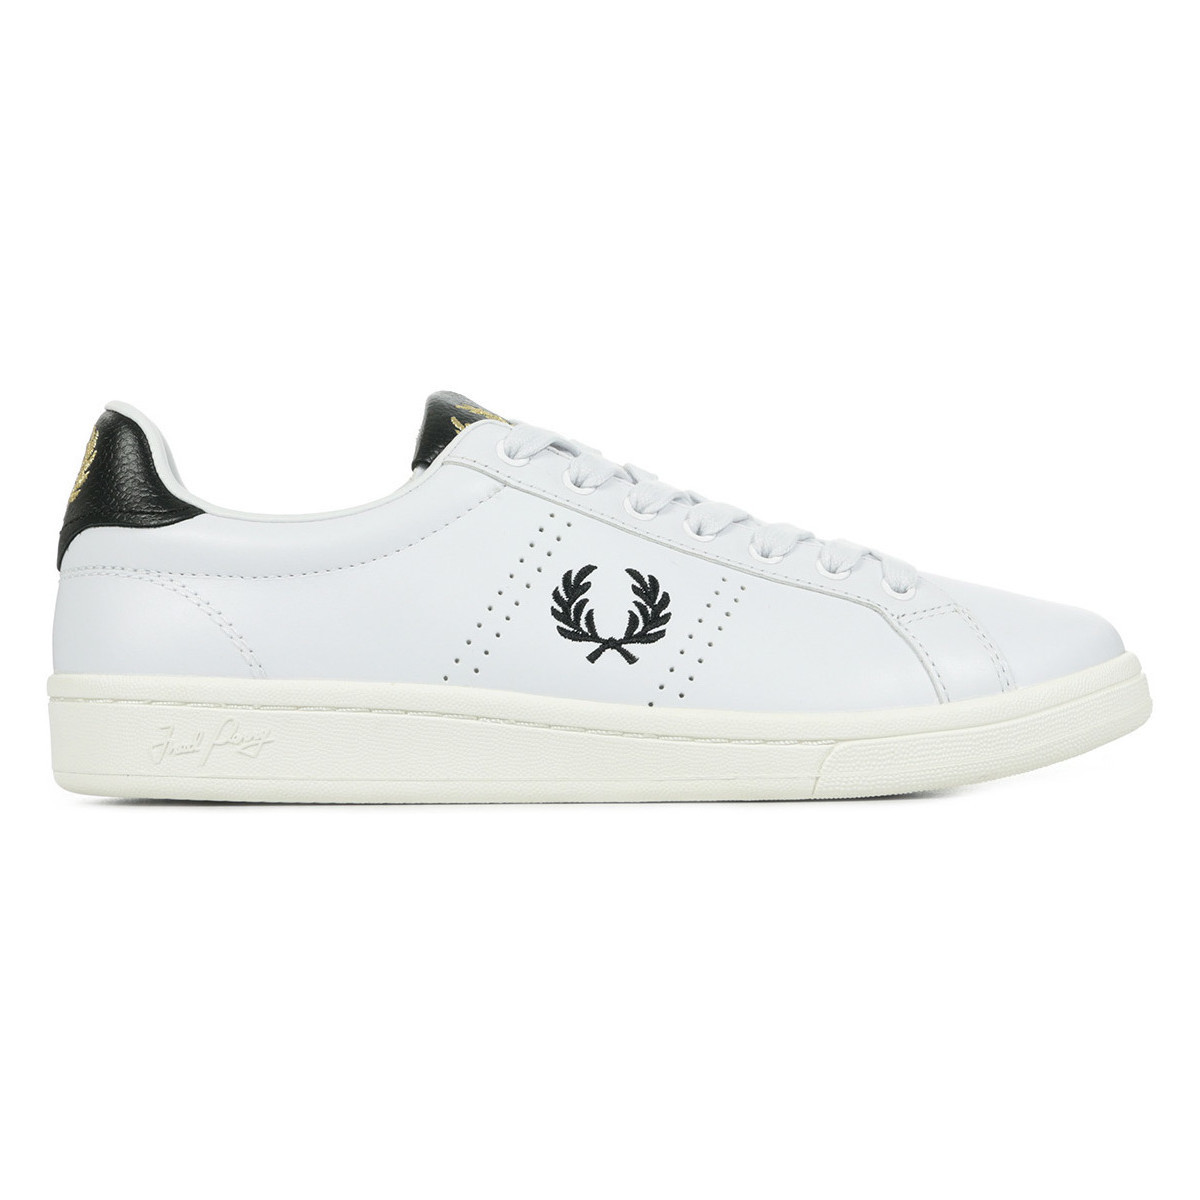 Fred Perry  B721 Pique Embossed Leather Branded  Bílá